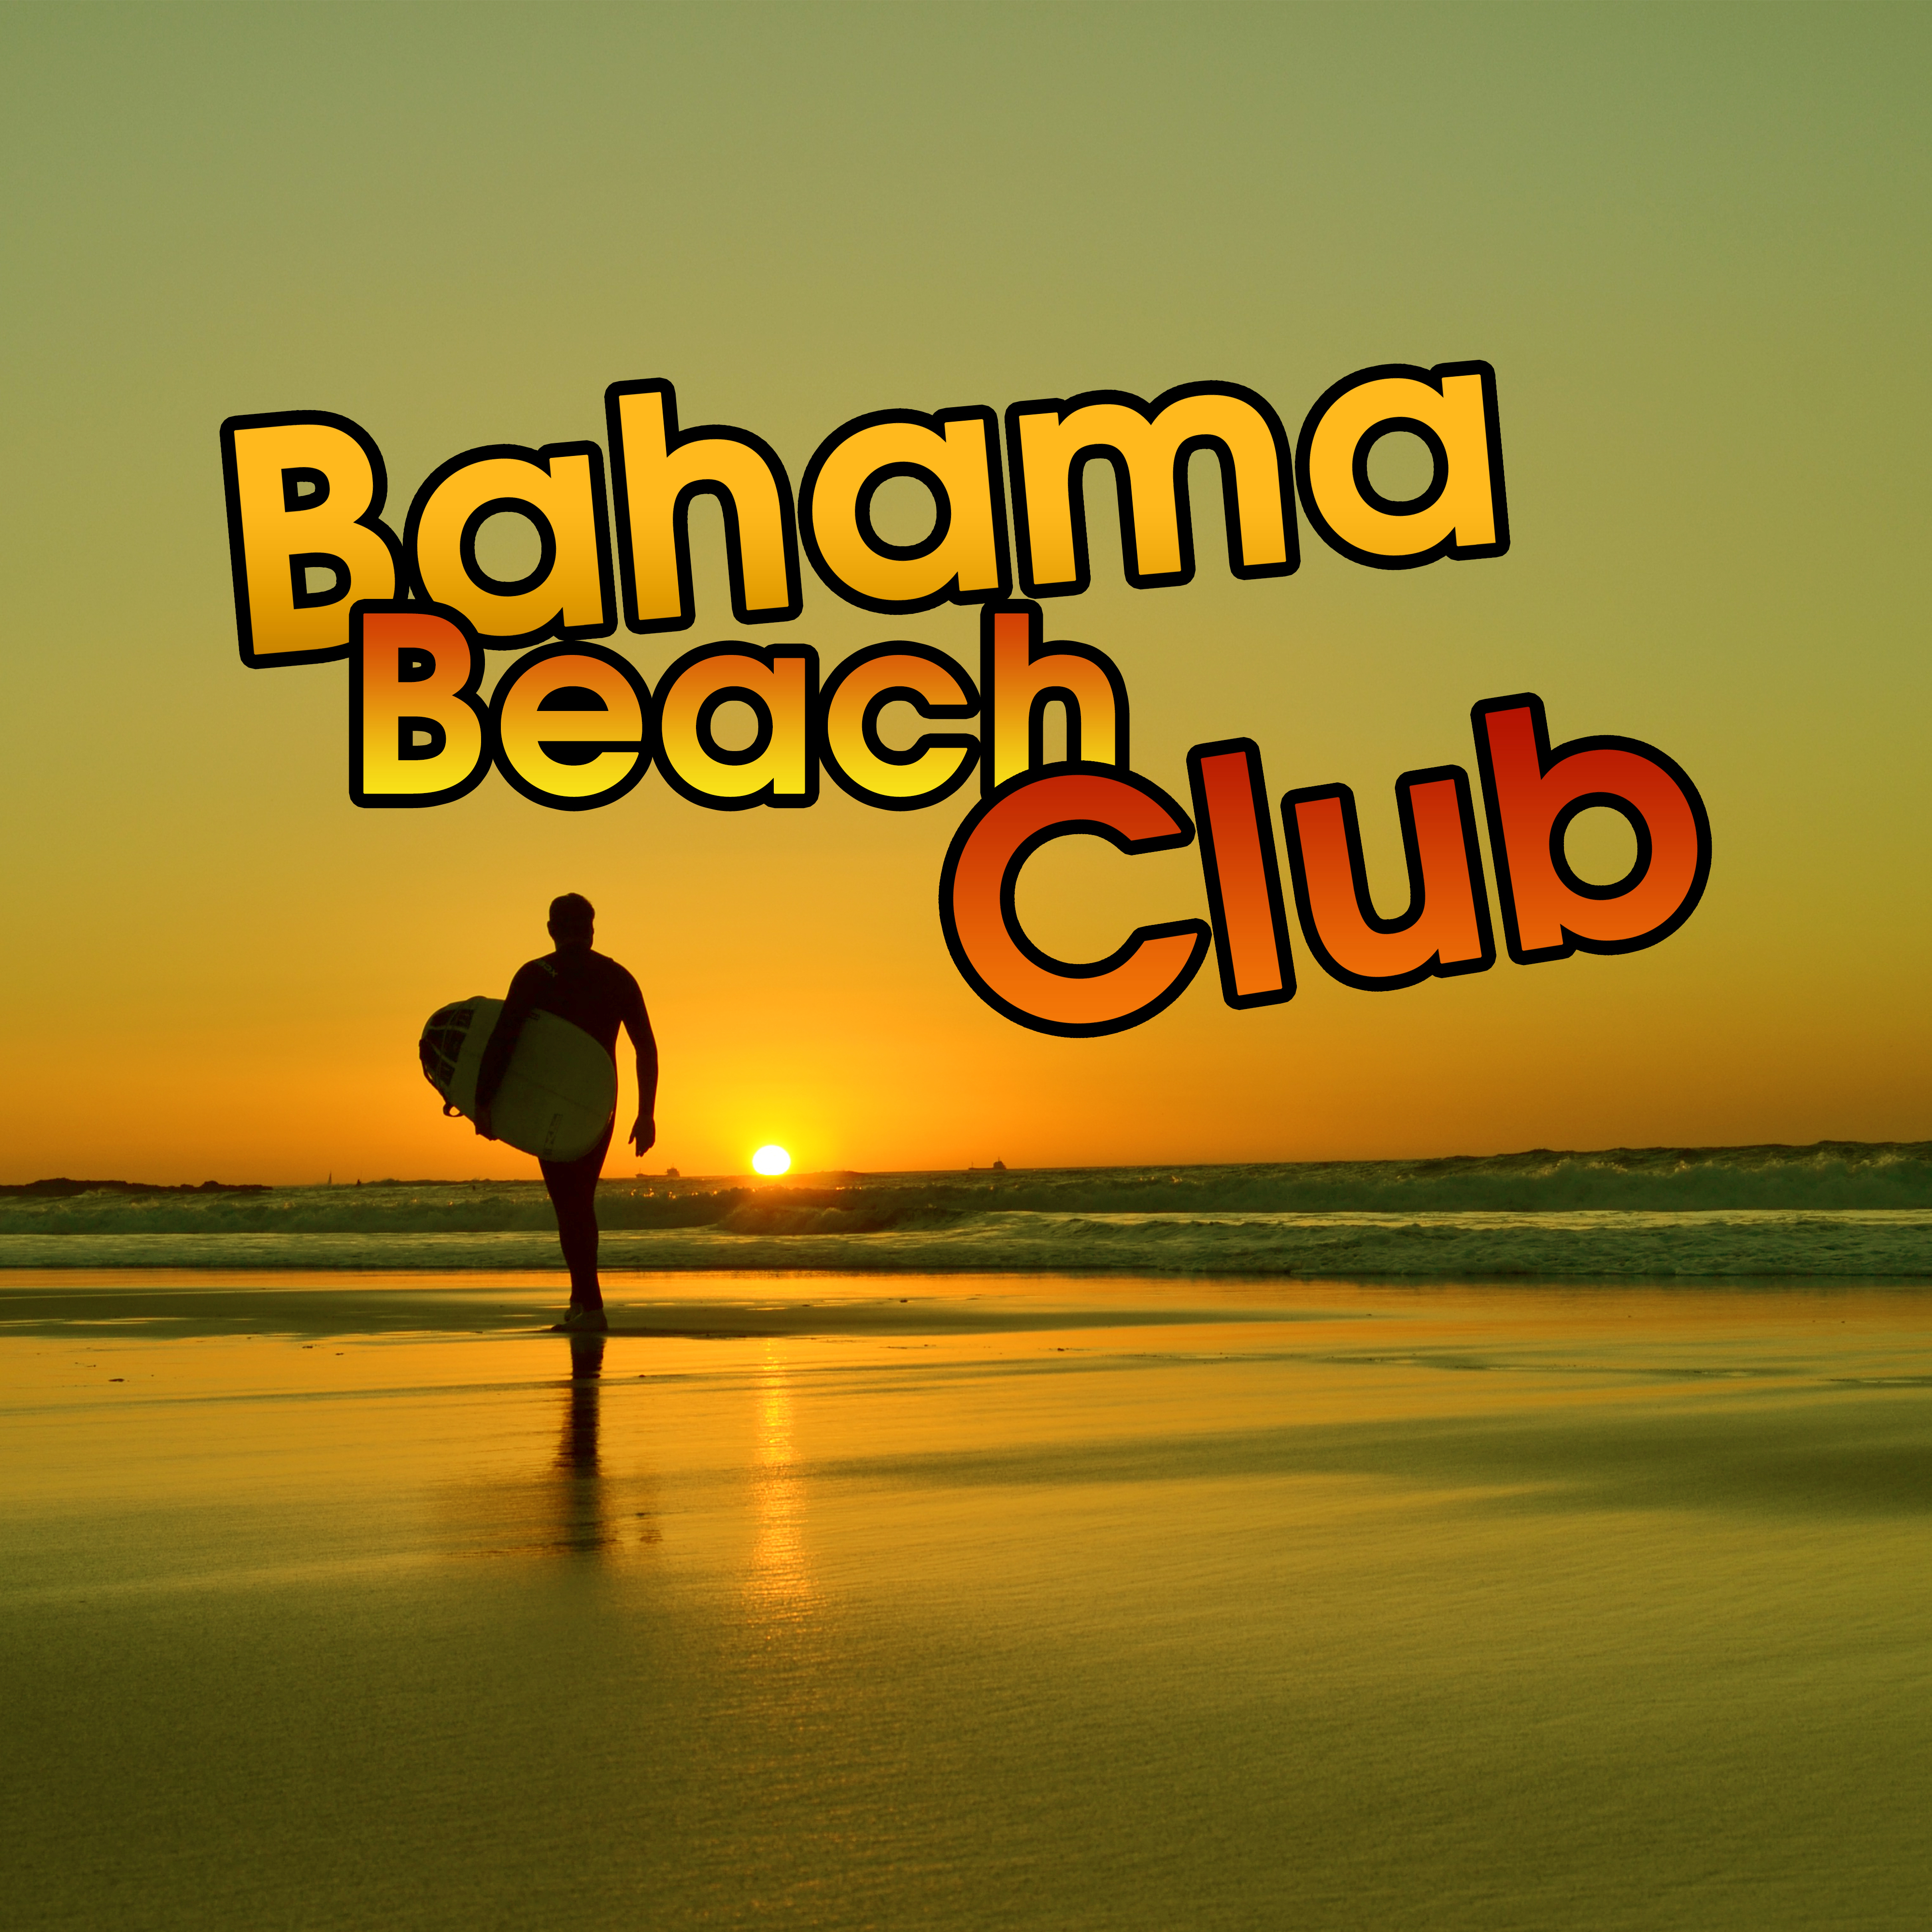 Bahama Beach Club – Summer Chillout, Tropical Lounge Music, Beach Party, Summer Vibes, Relax Under Palms, Chill Paradise